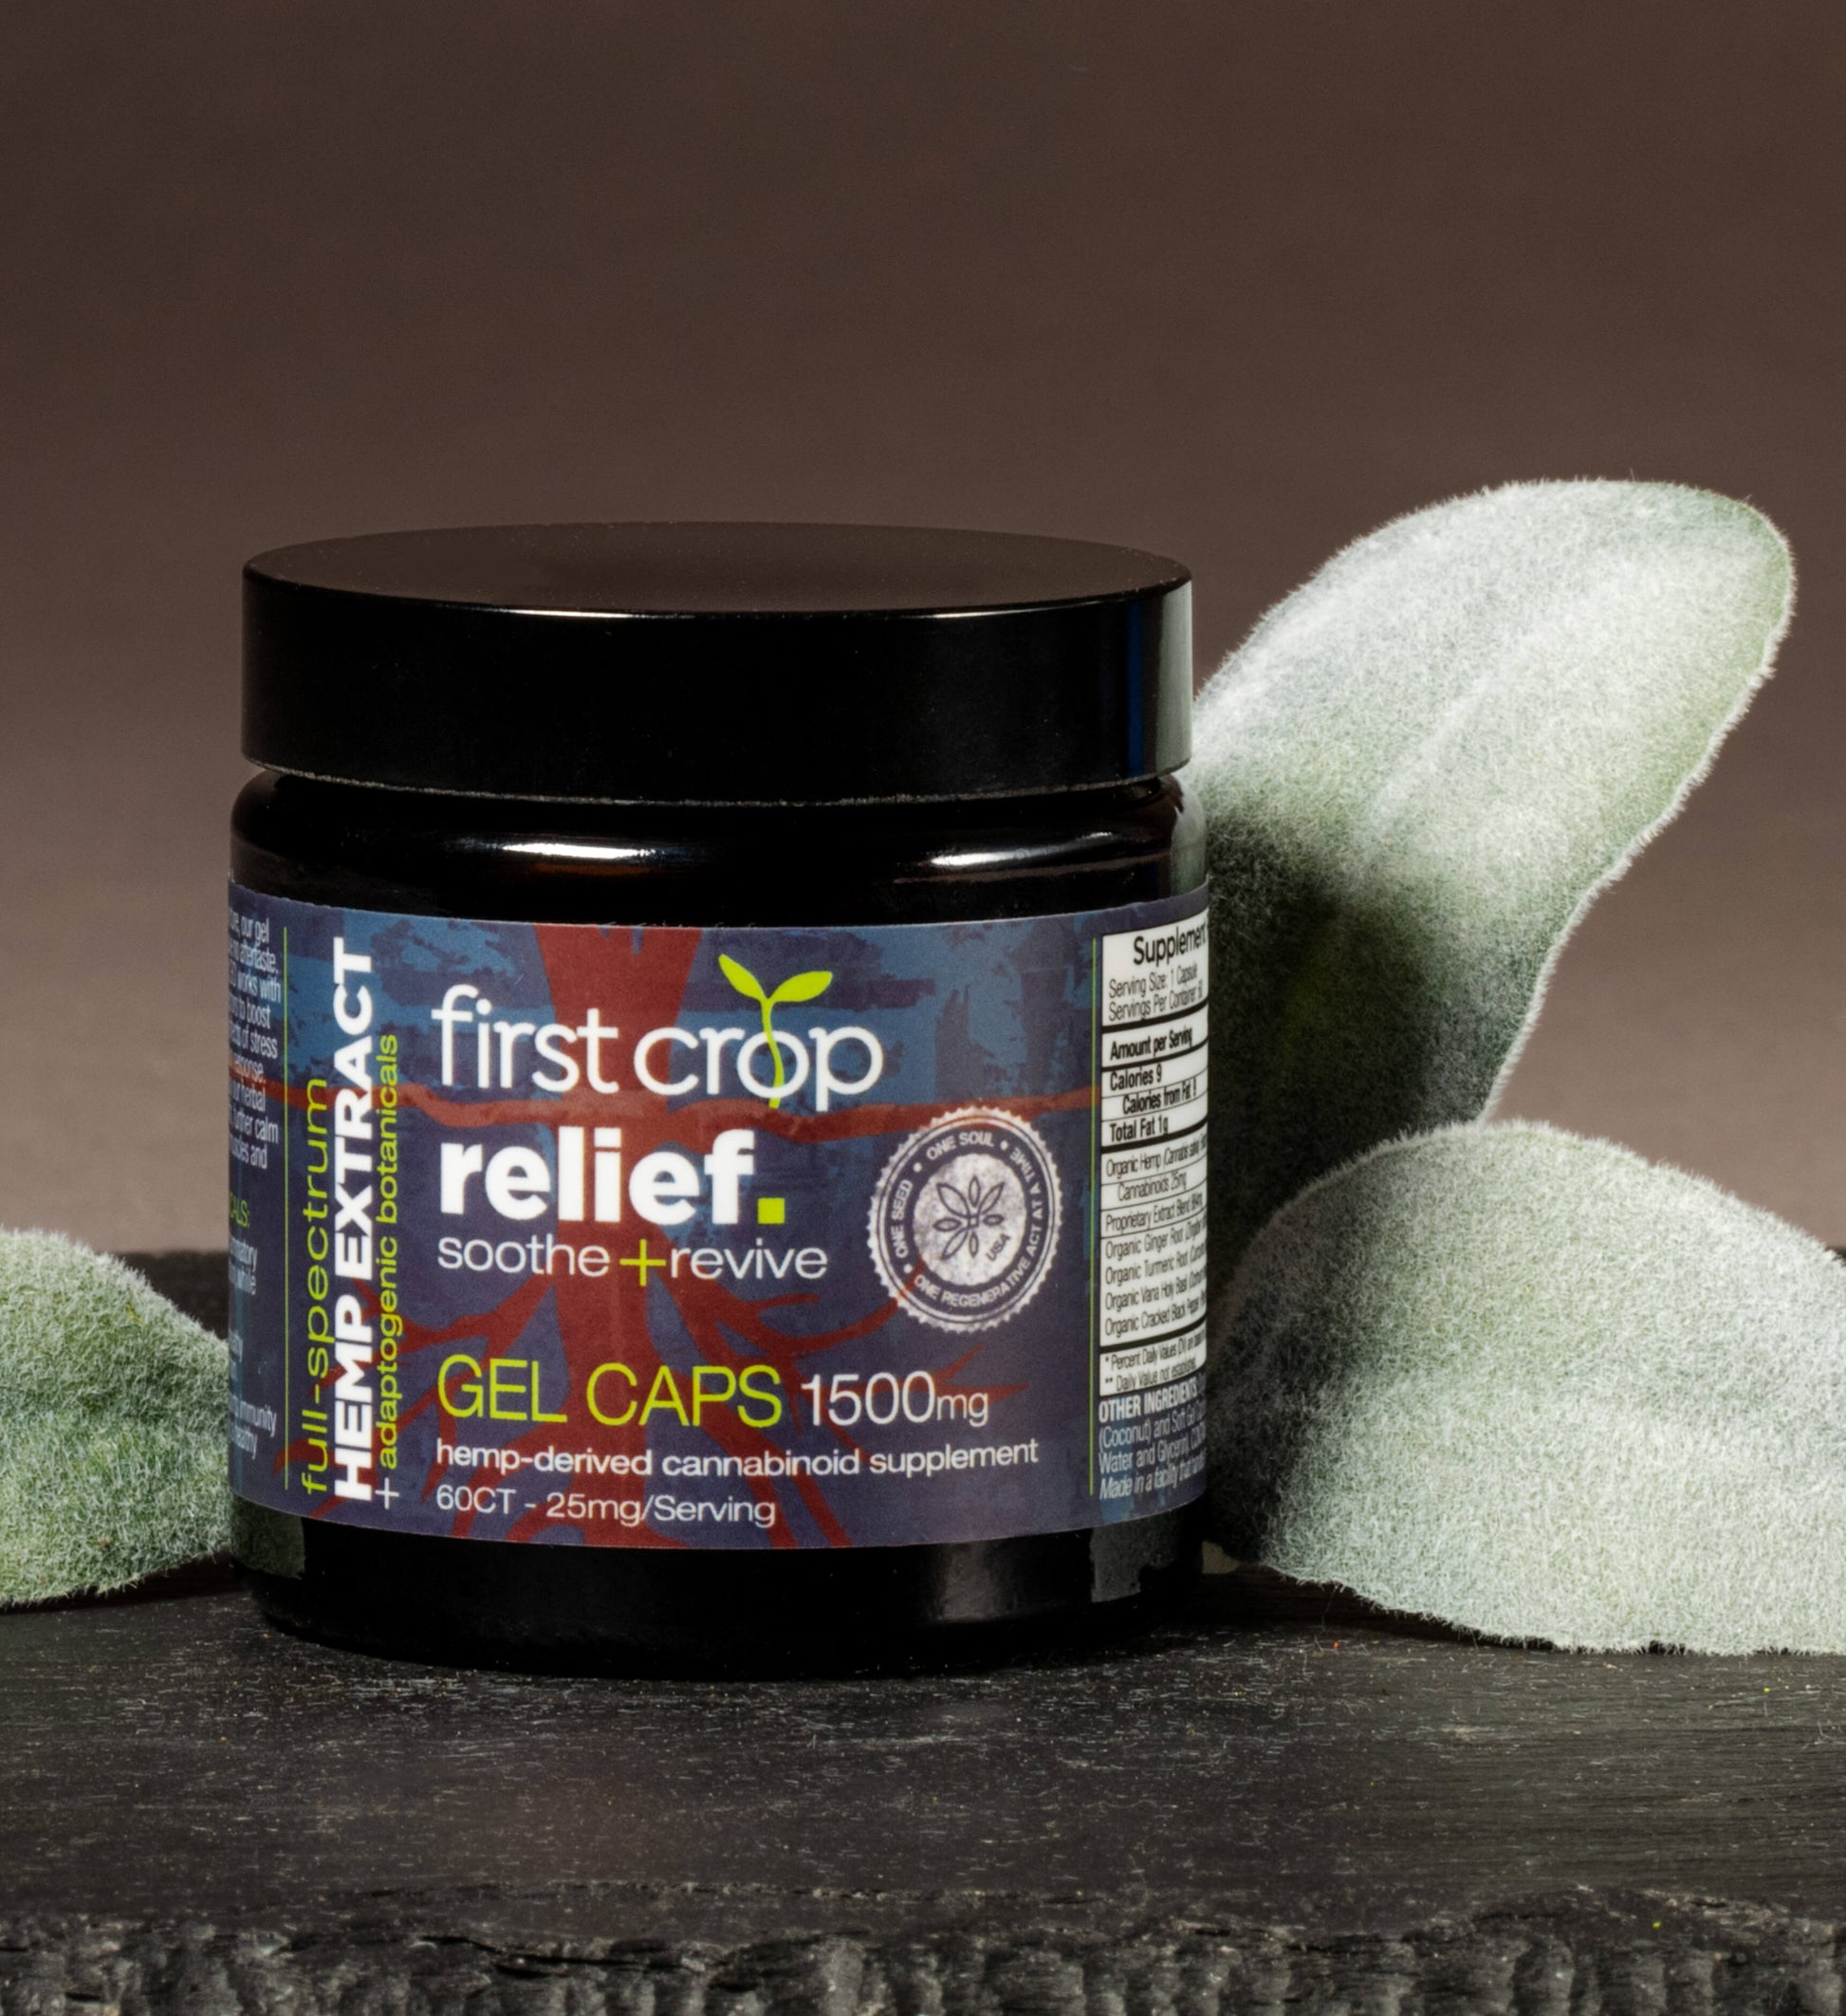 First Crop Full Spectrum Capsules - 1500mg (a Capsules) made by First Crop sold at CBD Emporium